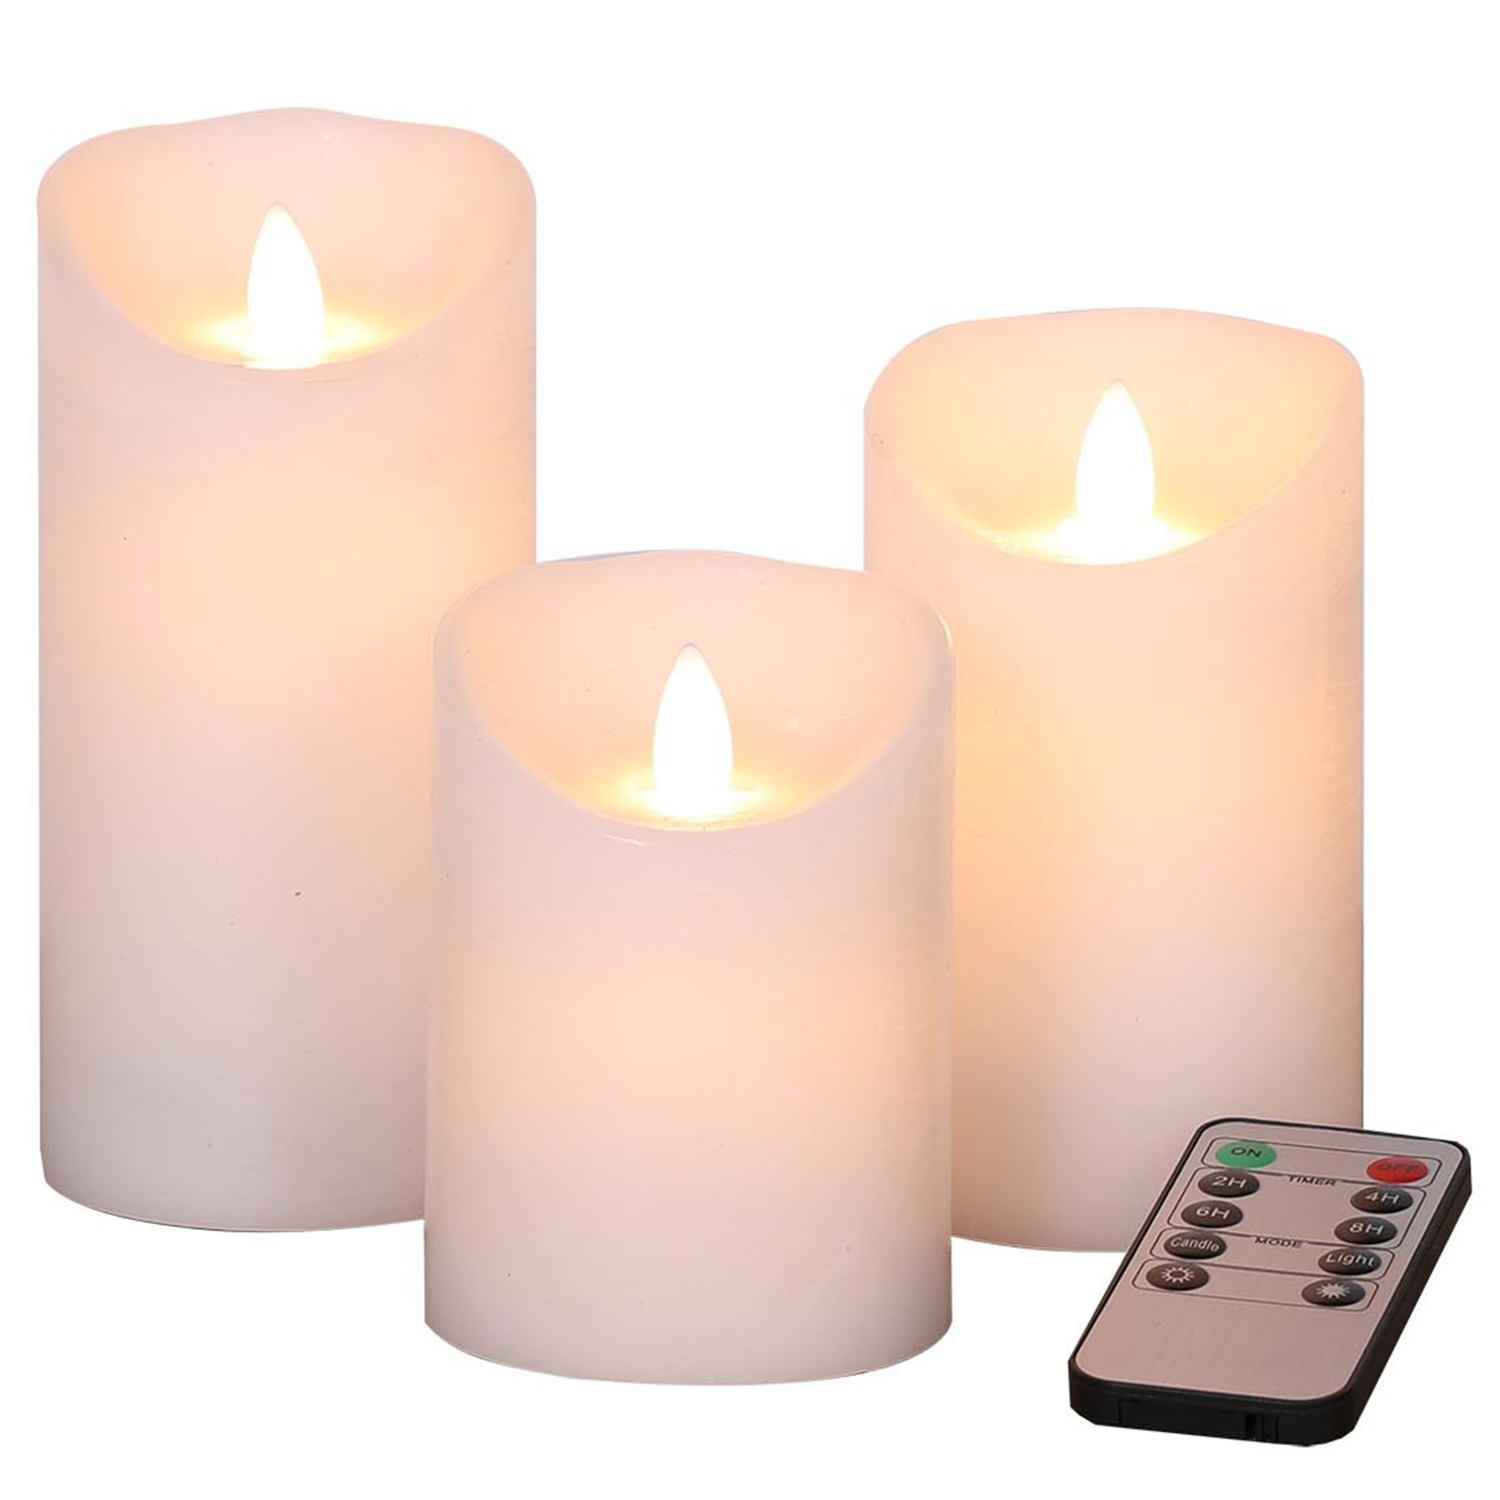 Cotton Fragranced LED Flameless Candles 3 Pack Image 1